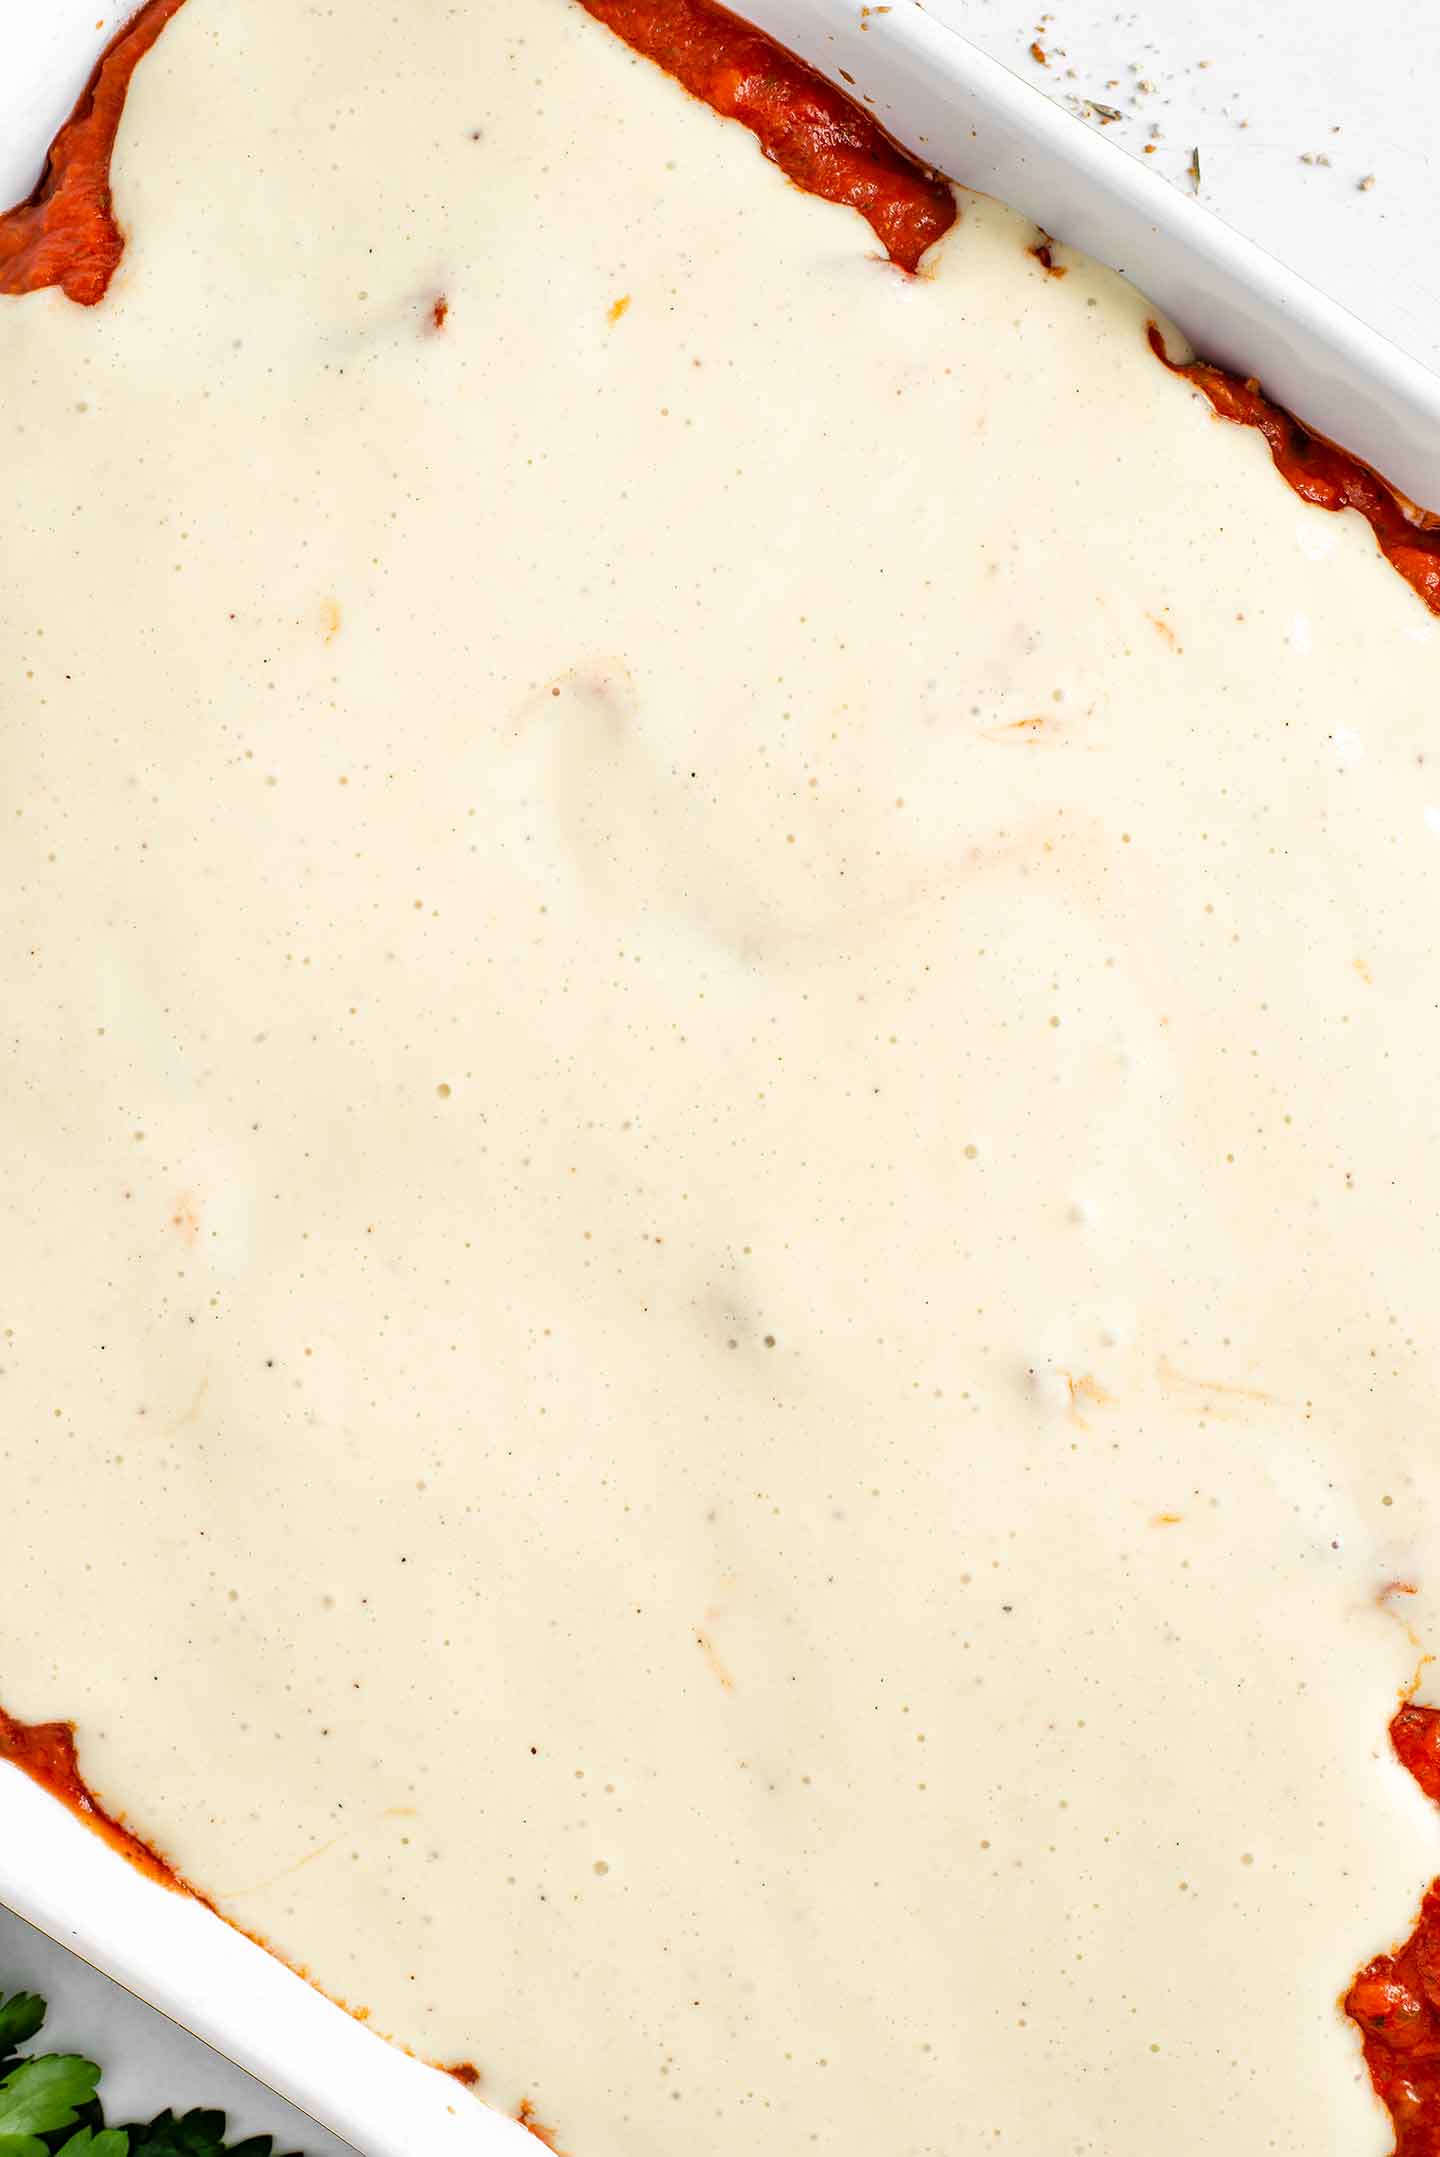 Top down view of white, cheesy bechamel sauce covering the top of the eggplant "parm" before going in the oven.